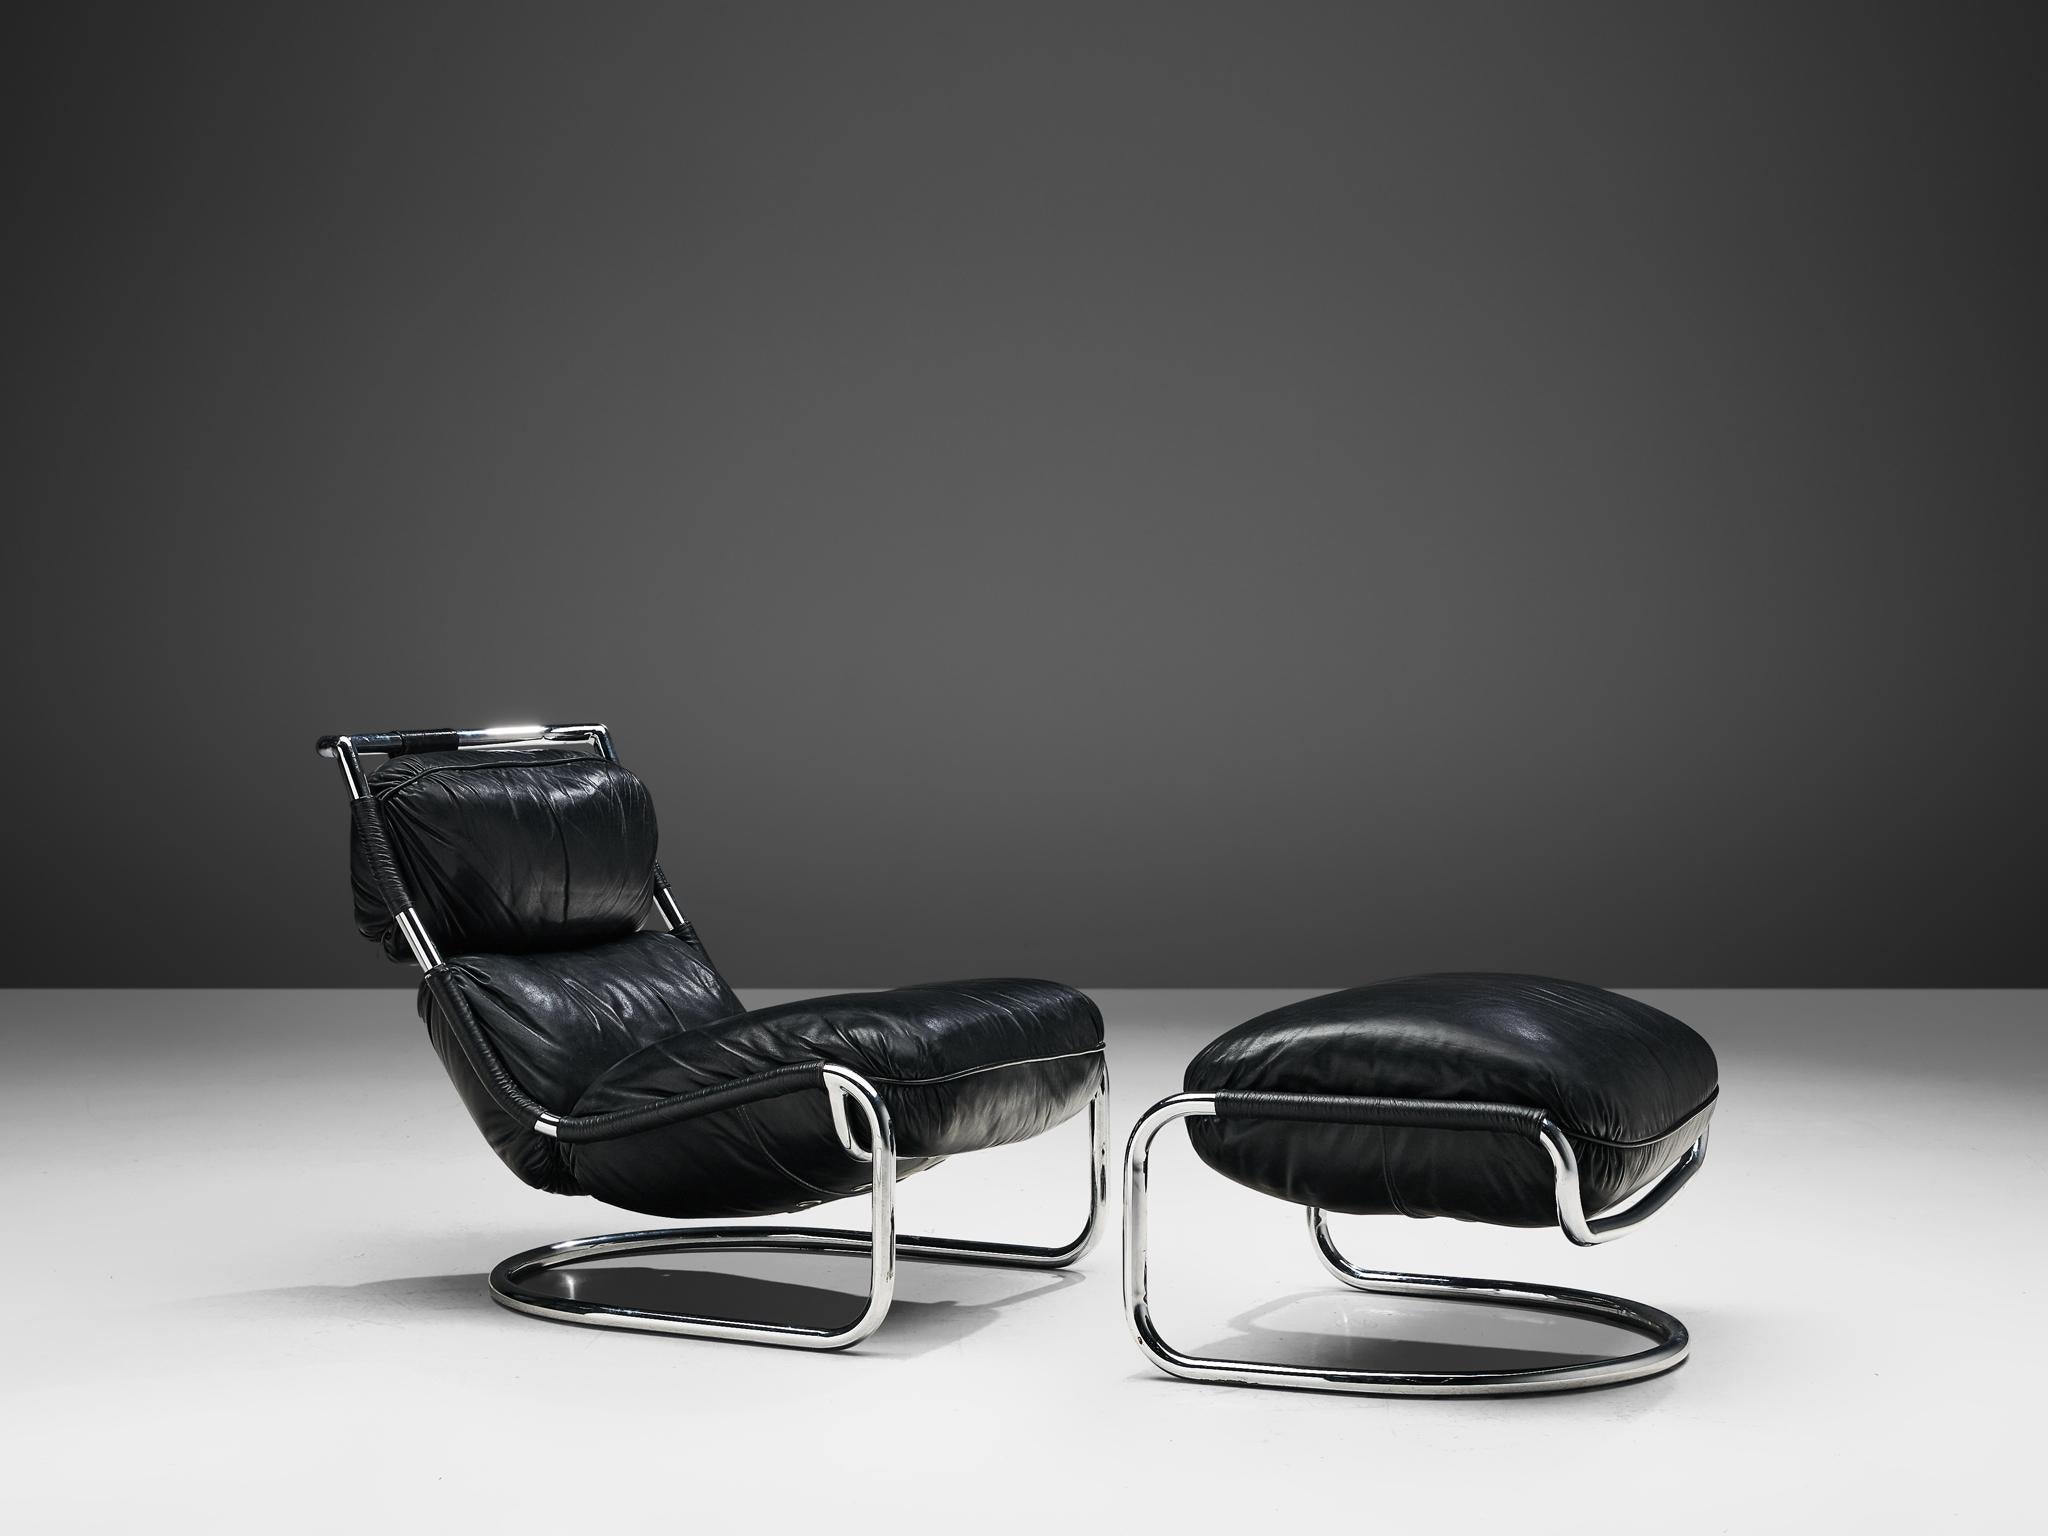 Lounge chair with ottoman, leather and chromed steel, Italy, 1970s

A tubular slipper chair with ottoman; functional and light thanks to the combination of strong, lasting materials. Bended tubular steel with black leather. Beautiful curved and